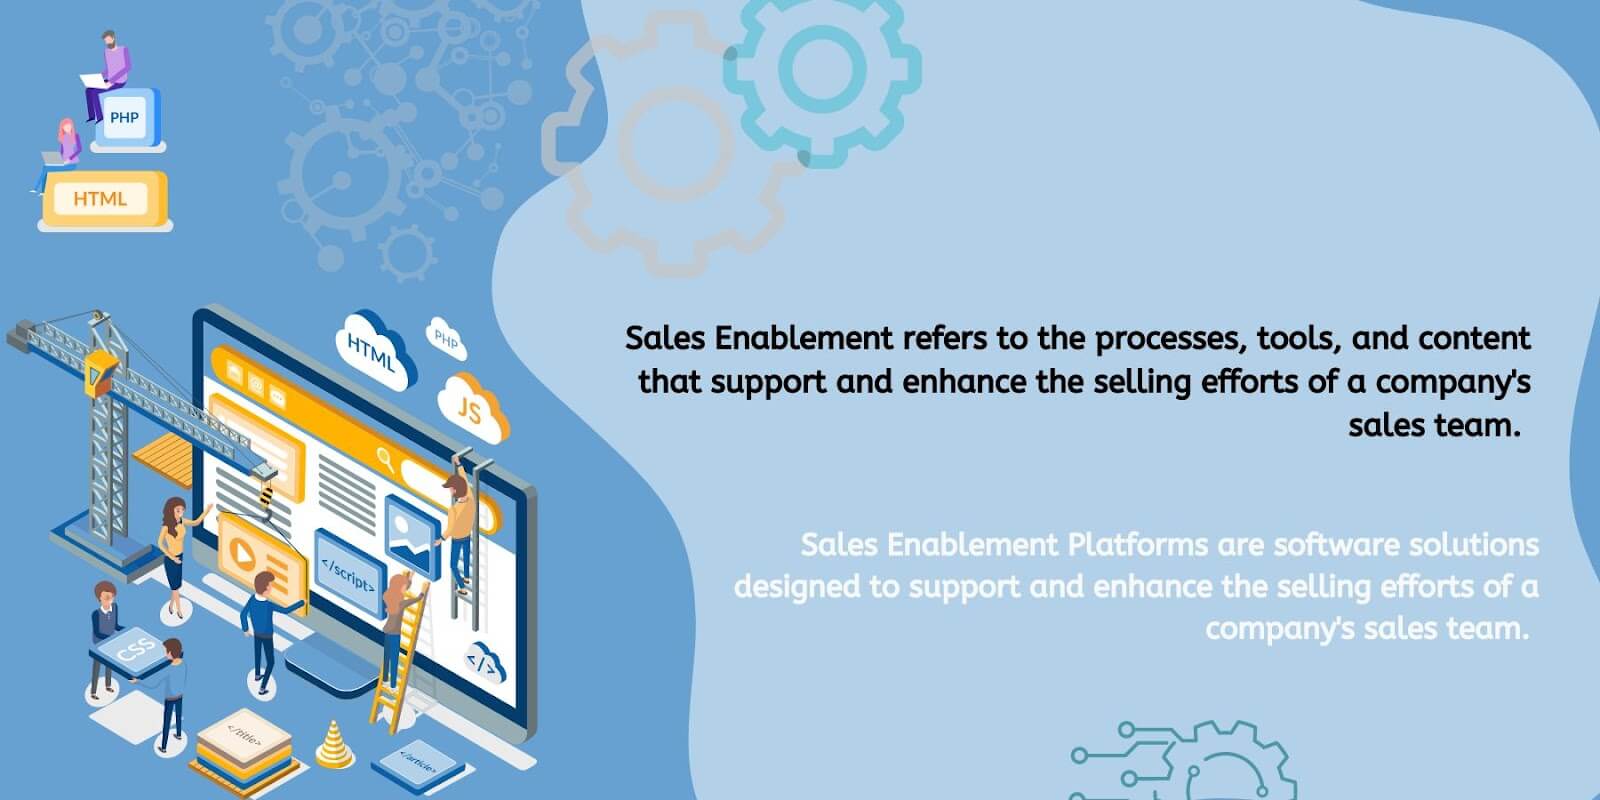 4. Top-Rated Sales Enablement Software to Streamline Your Sales Process